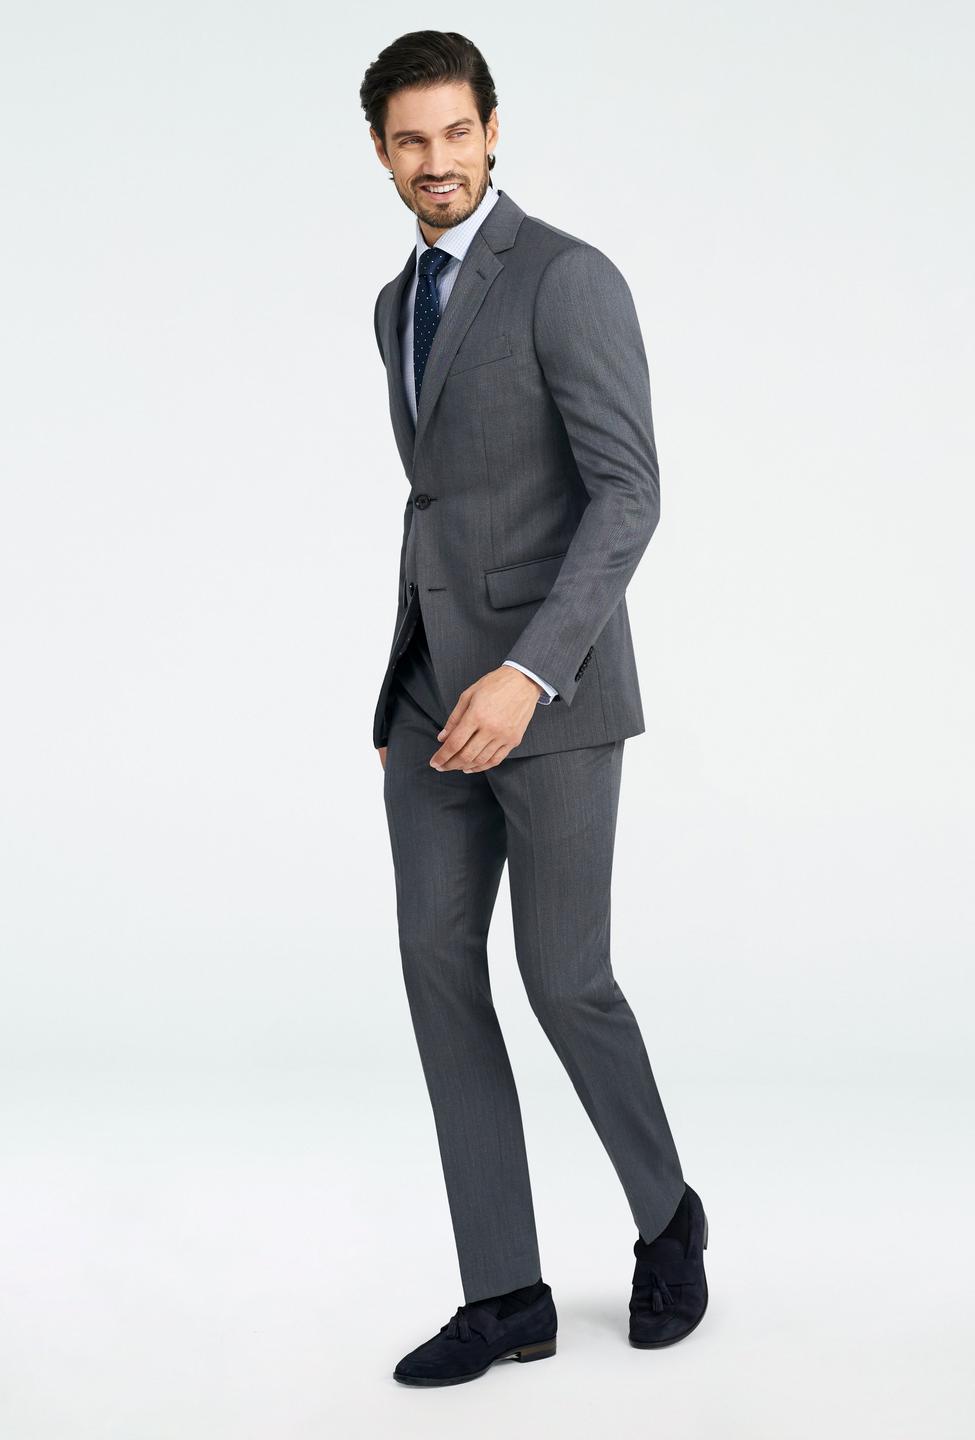 Gray suit - Hereford Solid Design from Premium Indochino Collection